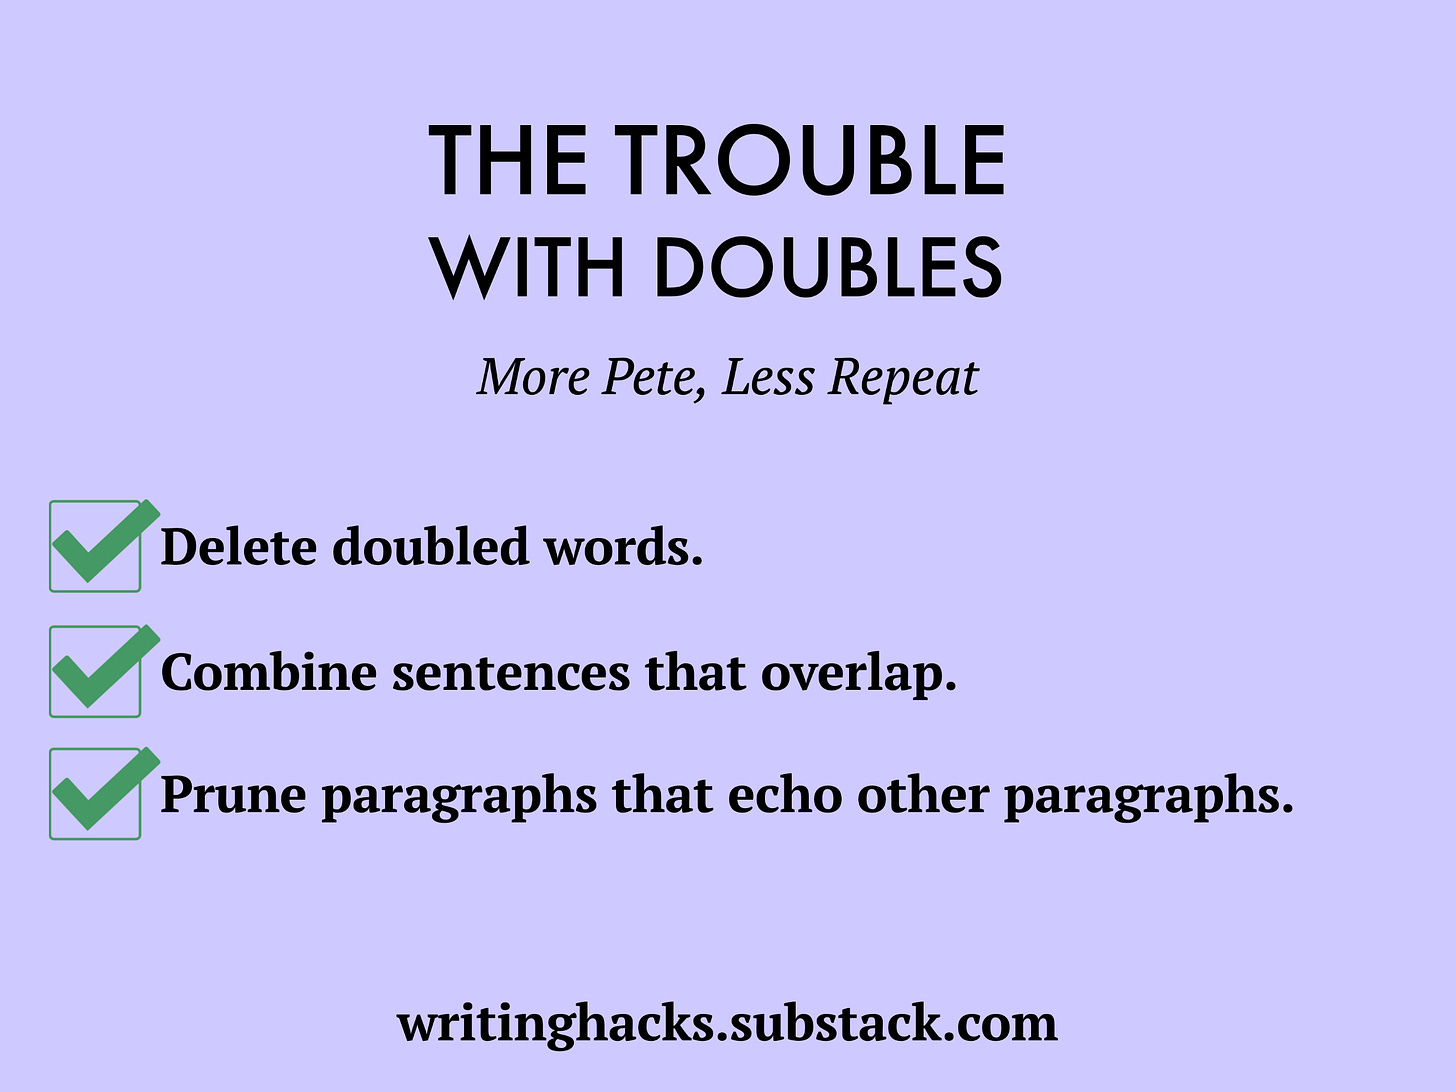 To avoid repetition, delete doubled words, combine sentences that overlap, prune paragraphs that echo other paragraphs. Click on the image to go to text version.